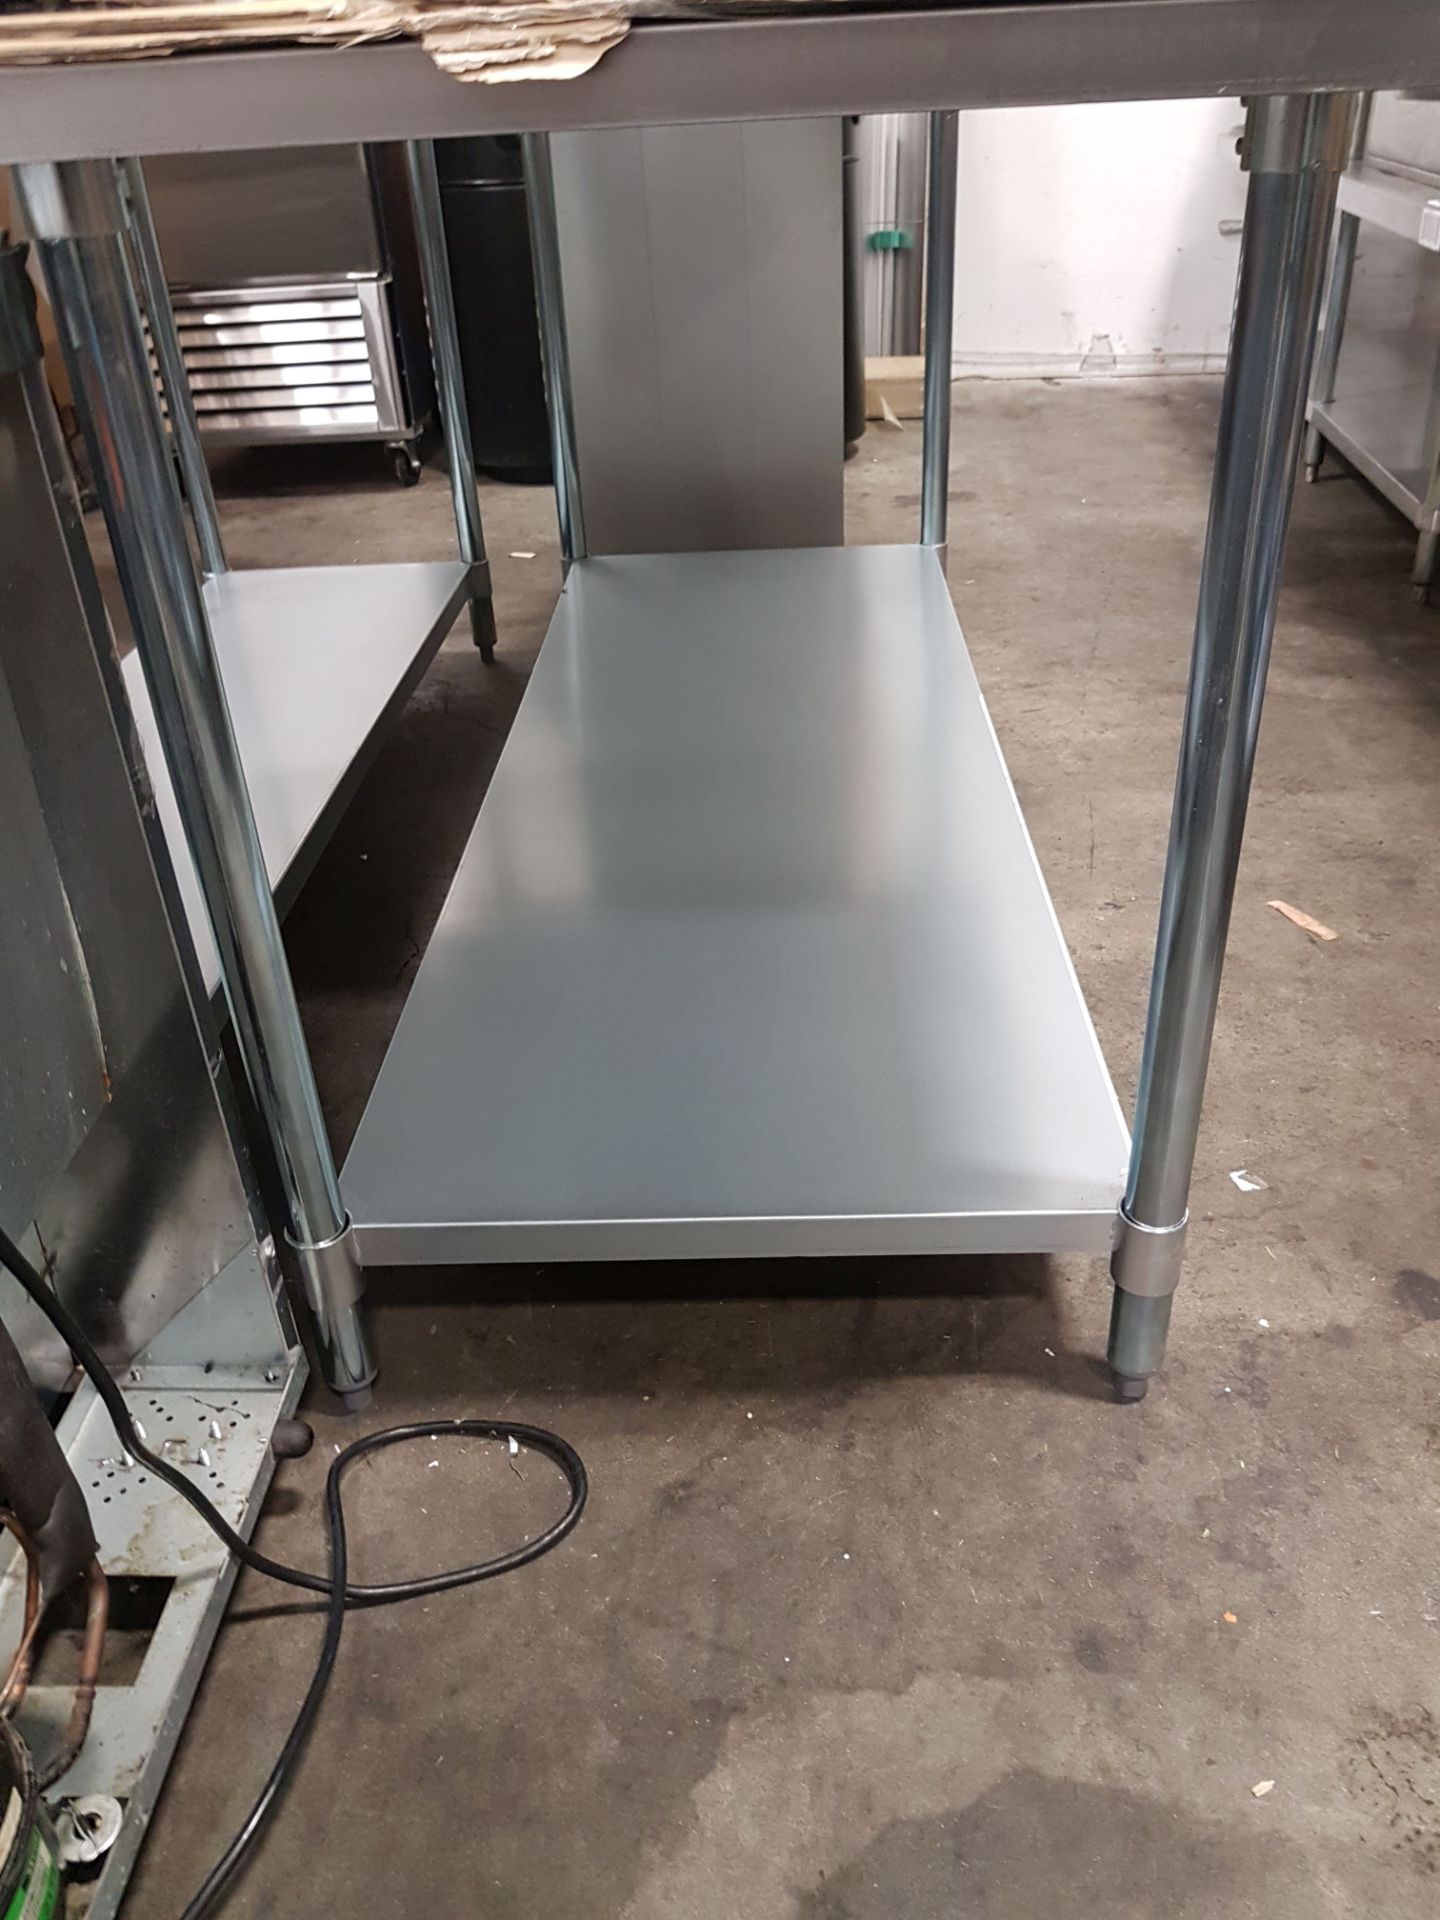 30" x 72" Stainless Work Table with Galvanized Under Shelf - Image 2 of 2